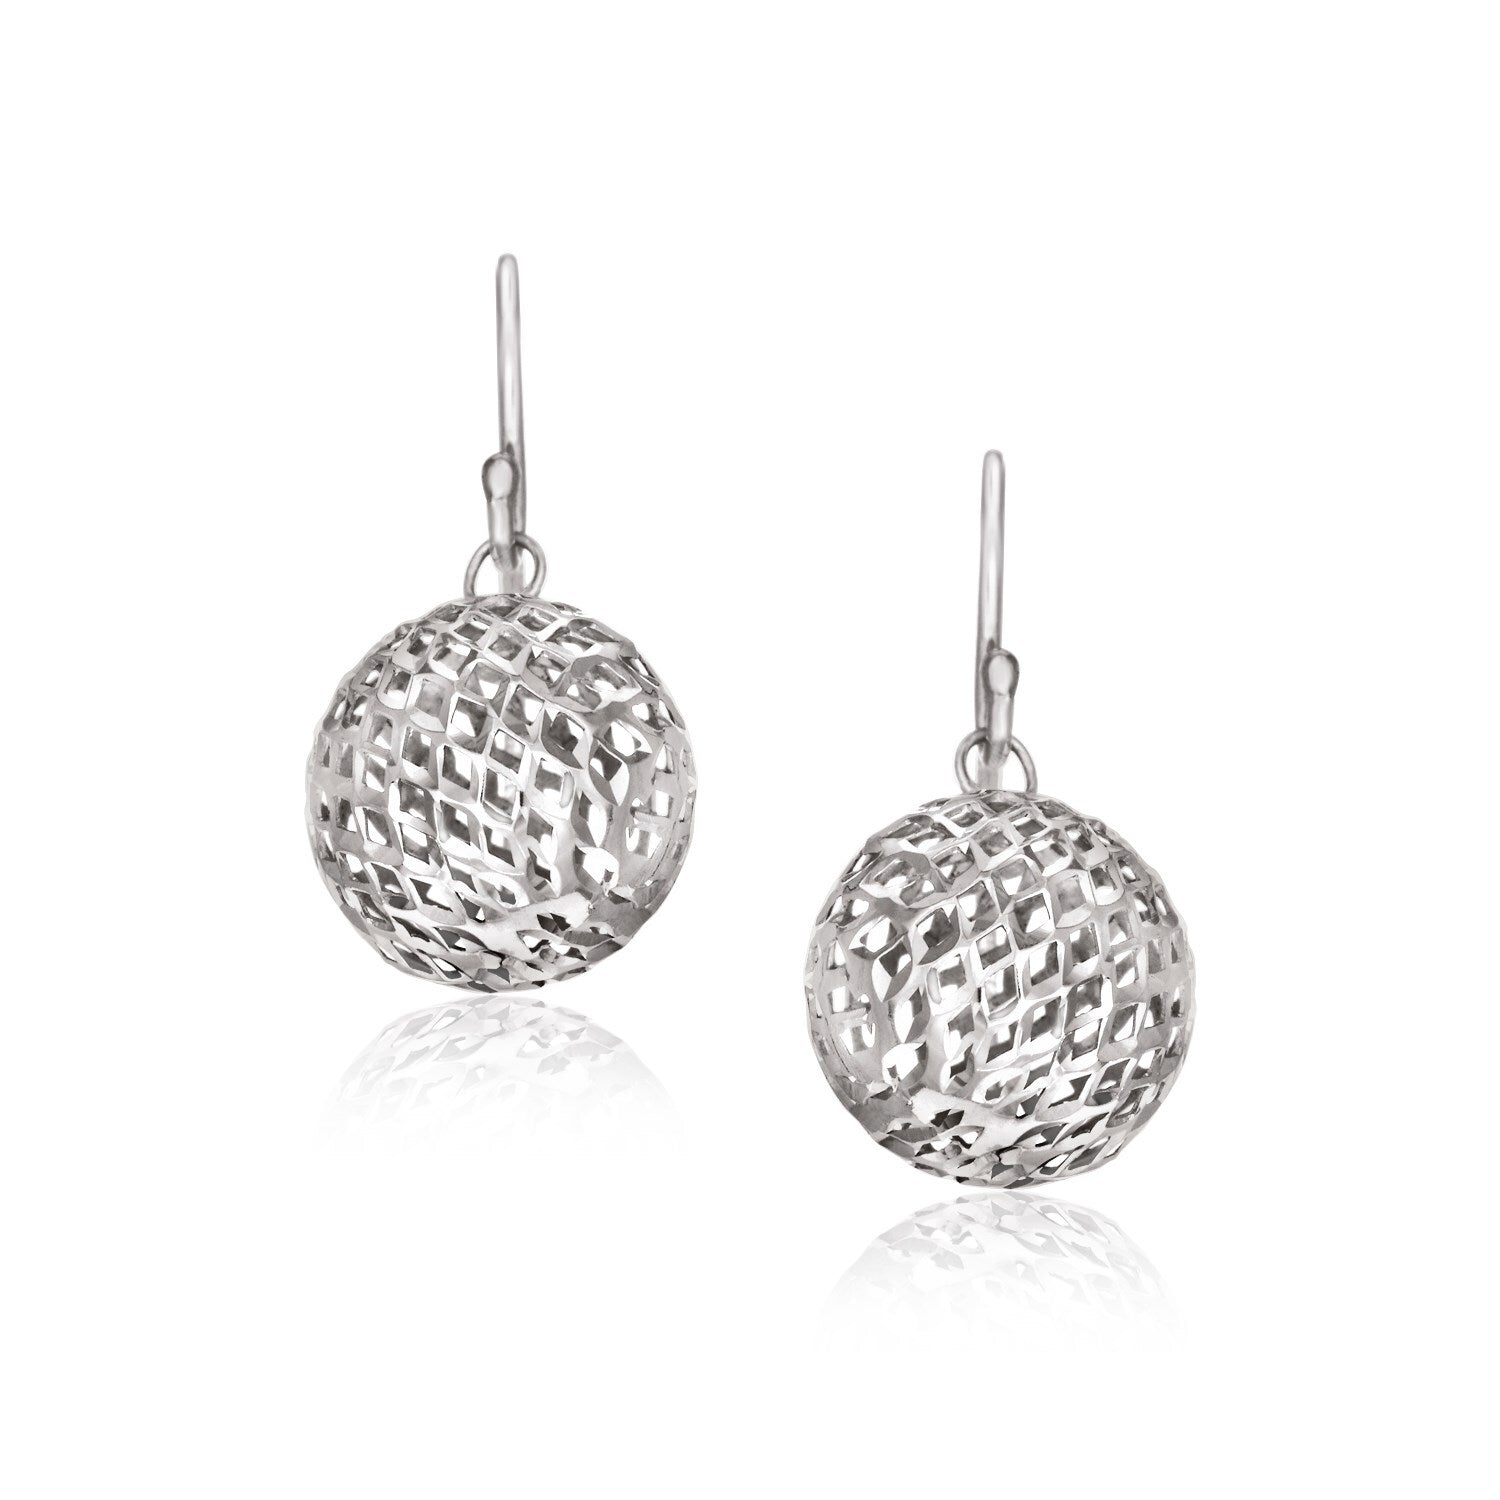 Sterling Silver Round Drop Earrings with Mesh Design